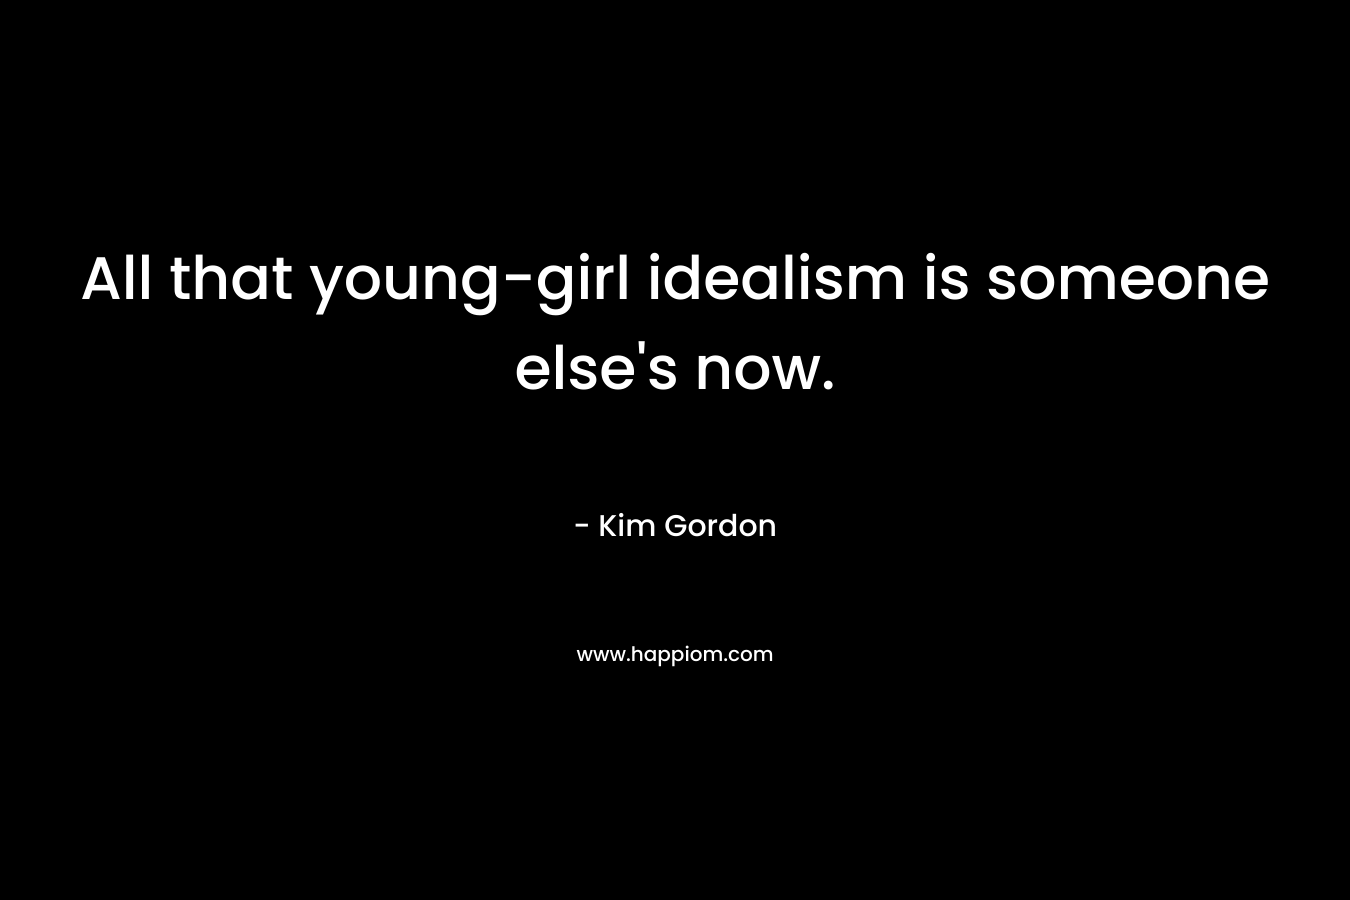 All that young-girl idealism is someone else's now.